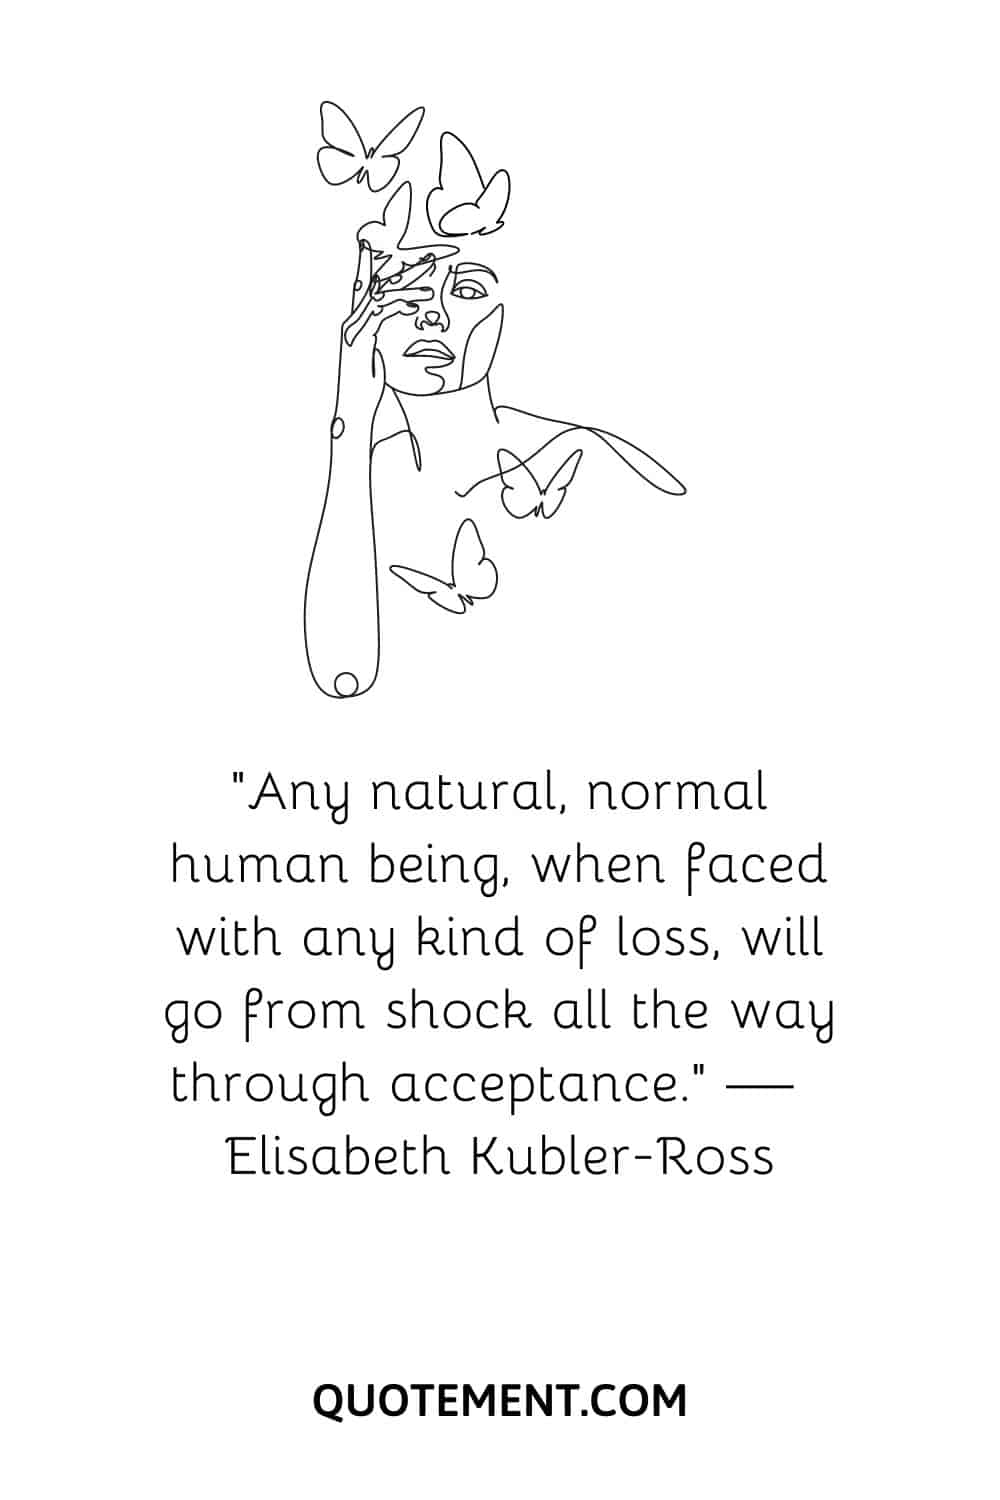 “Any natural, normal human being, when faced with any kind of loss, will go from shock all the way through acceptance.” — Elisabeth Kubler-Ross